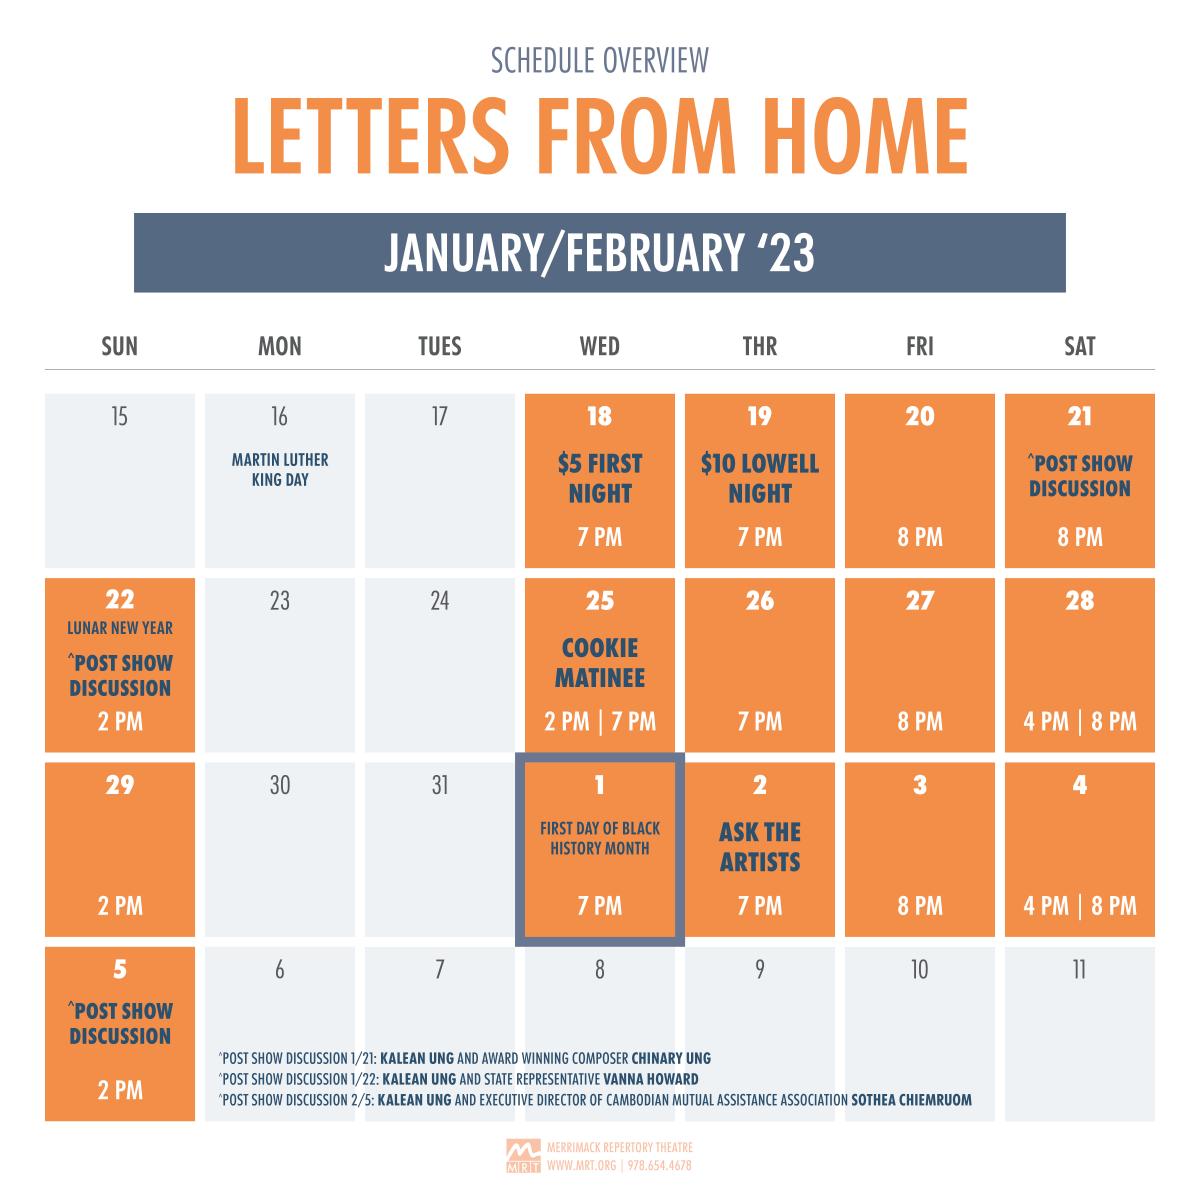 Letters from Home Merrimack Repertory Theatre